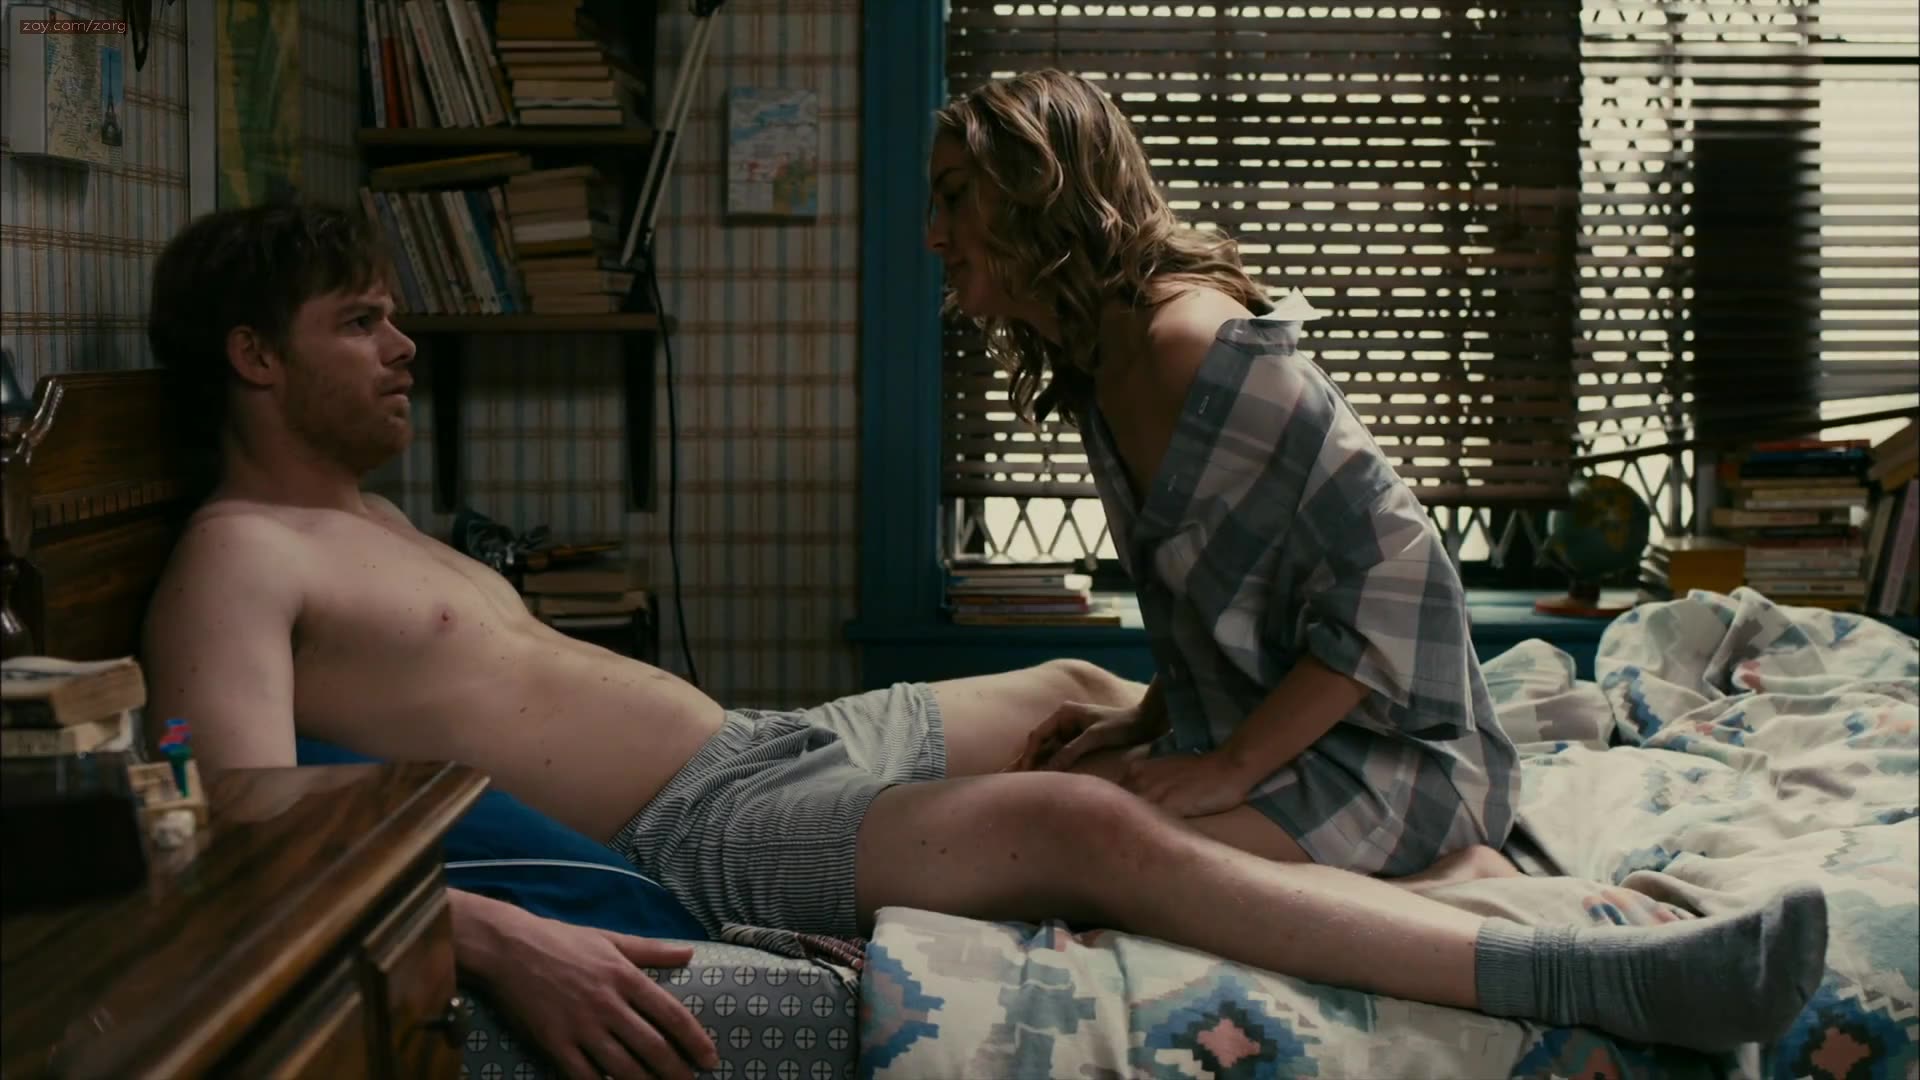 Brie Larson jumps on bed with Michael C. Hall -- longer version from The Trouble With Bliss